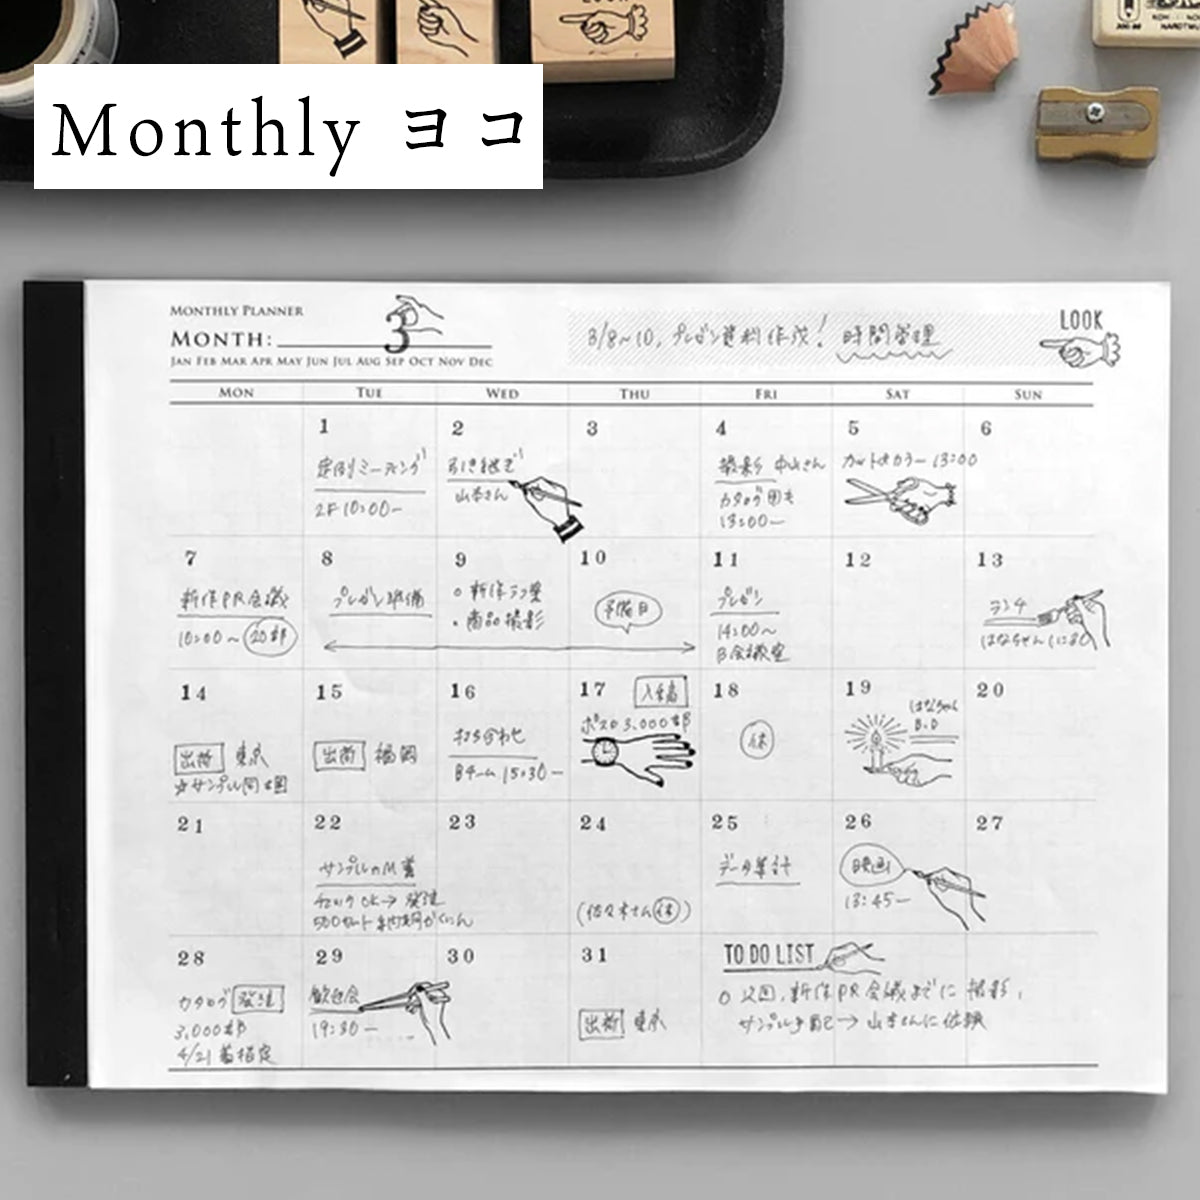 [B5 size] Planner (TODO/MONTHLY/WEEKLY/MEETING)